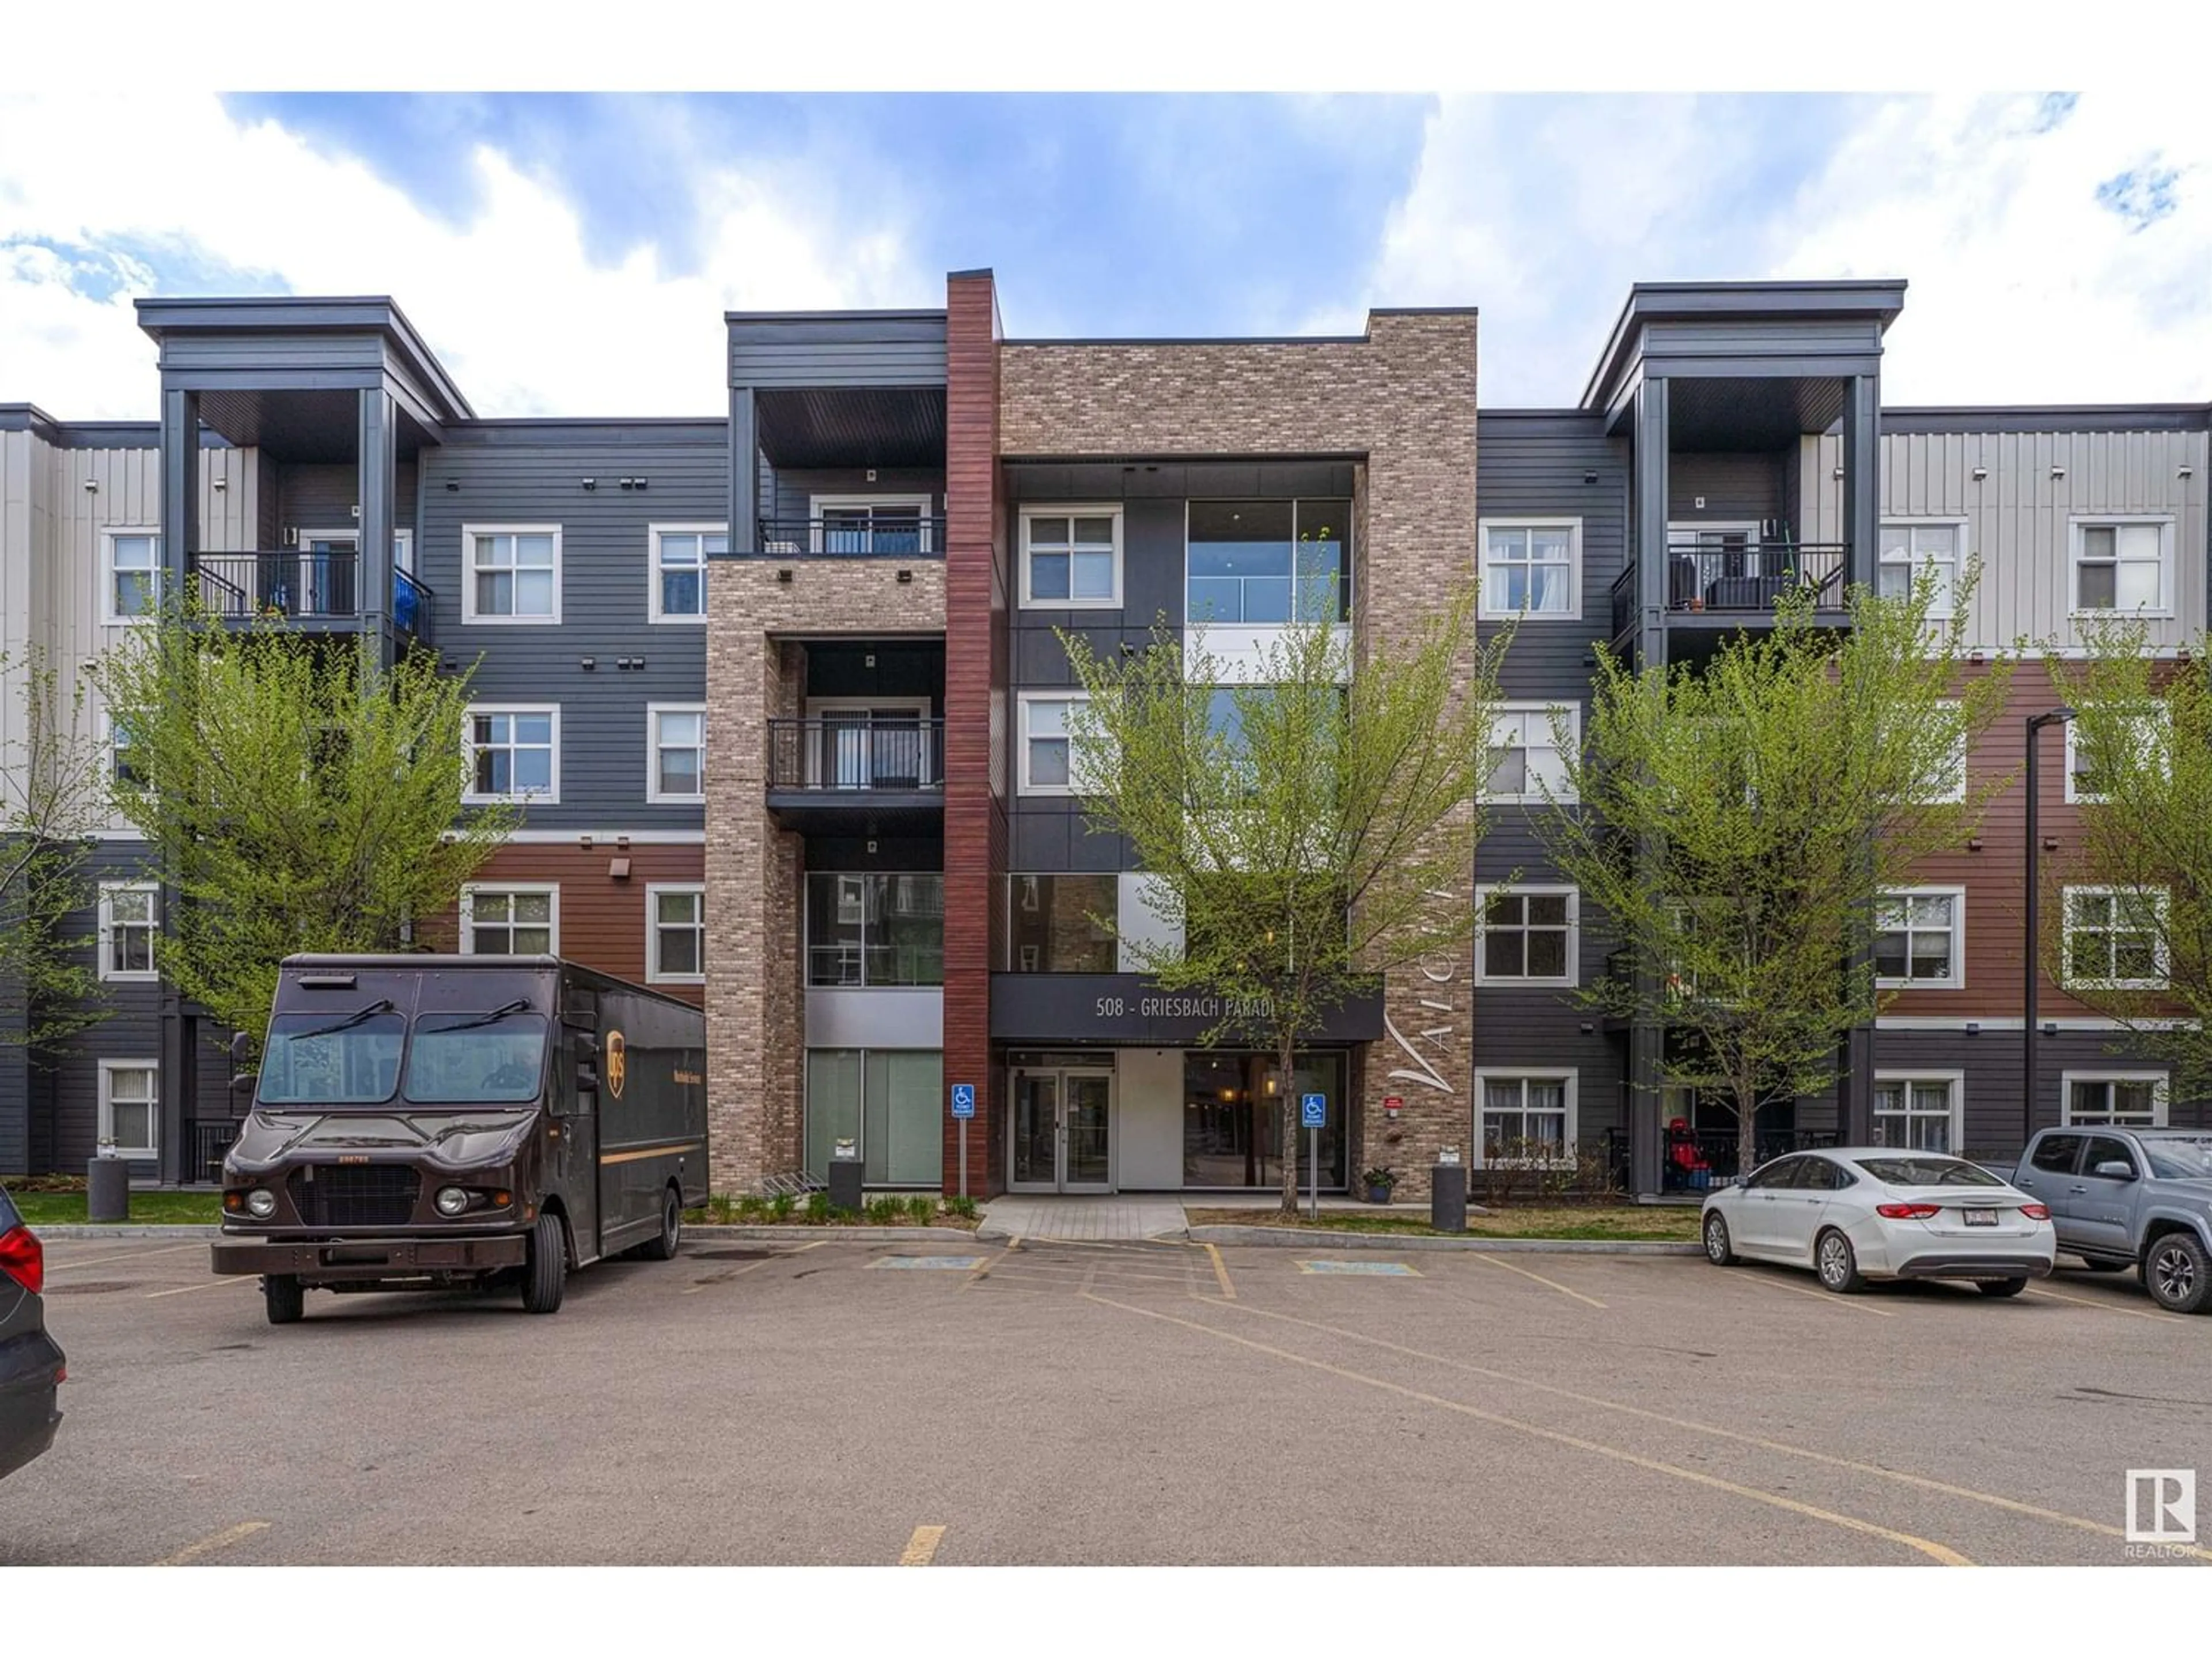 A pic from exterior of the house or condo for #319 508 GRIESBACH PR NW, Edmonton Alberta T5E6V9